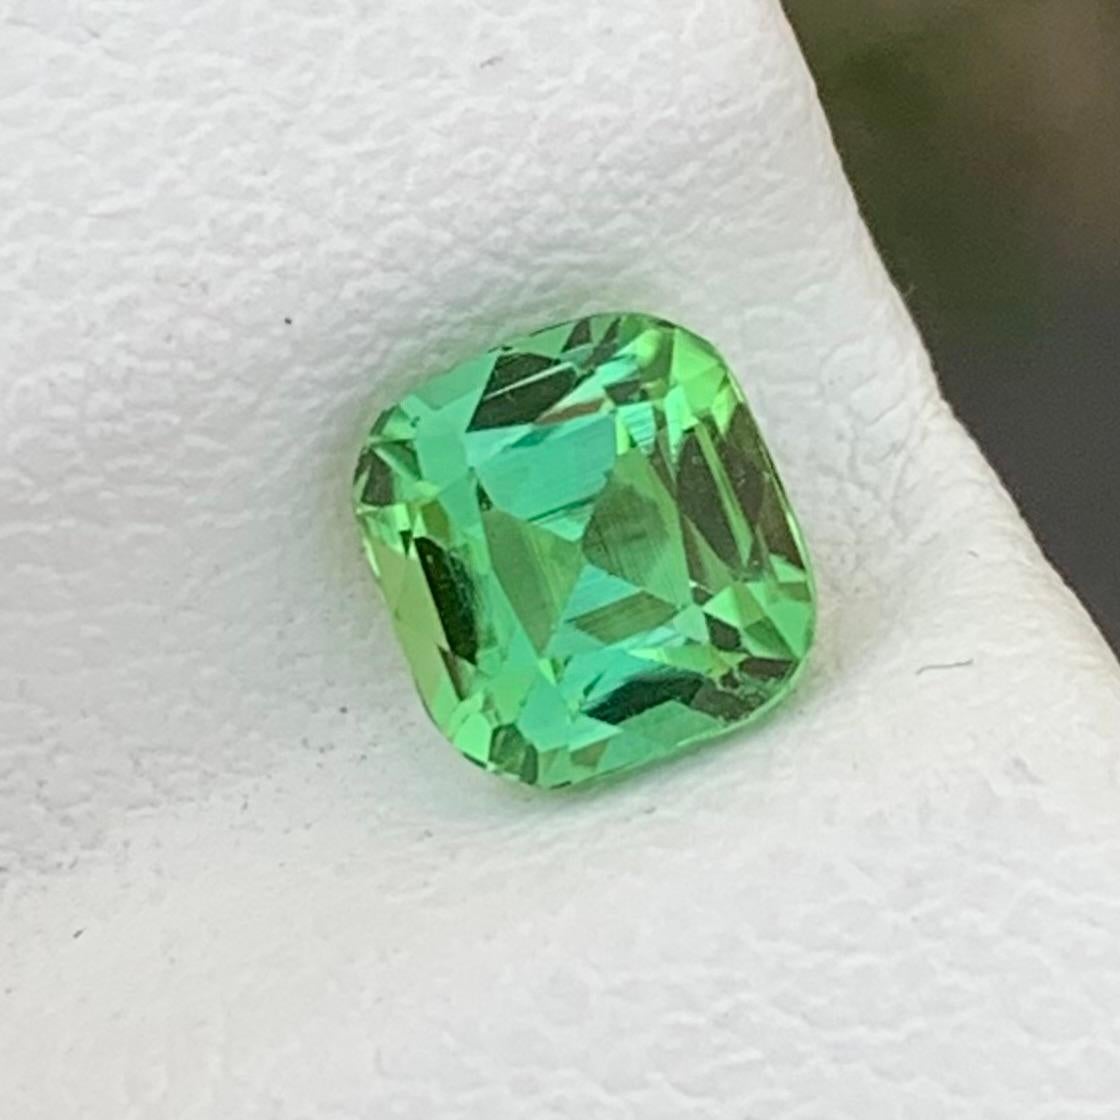 Loose Mint Green Tourmaline
Weight: 1.00 Carats
Dimension: 5.6 x 5.3 x 4.4 Mm
Colour: Mint Green
Origin: Afghanistan
Certificate: On Demand
Treatment: Non

Tourmaline is a captivating gemstone known for its remarkable variety of colors, making it a